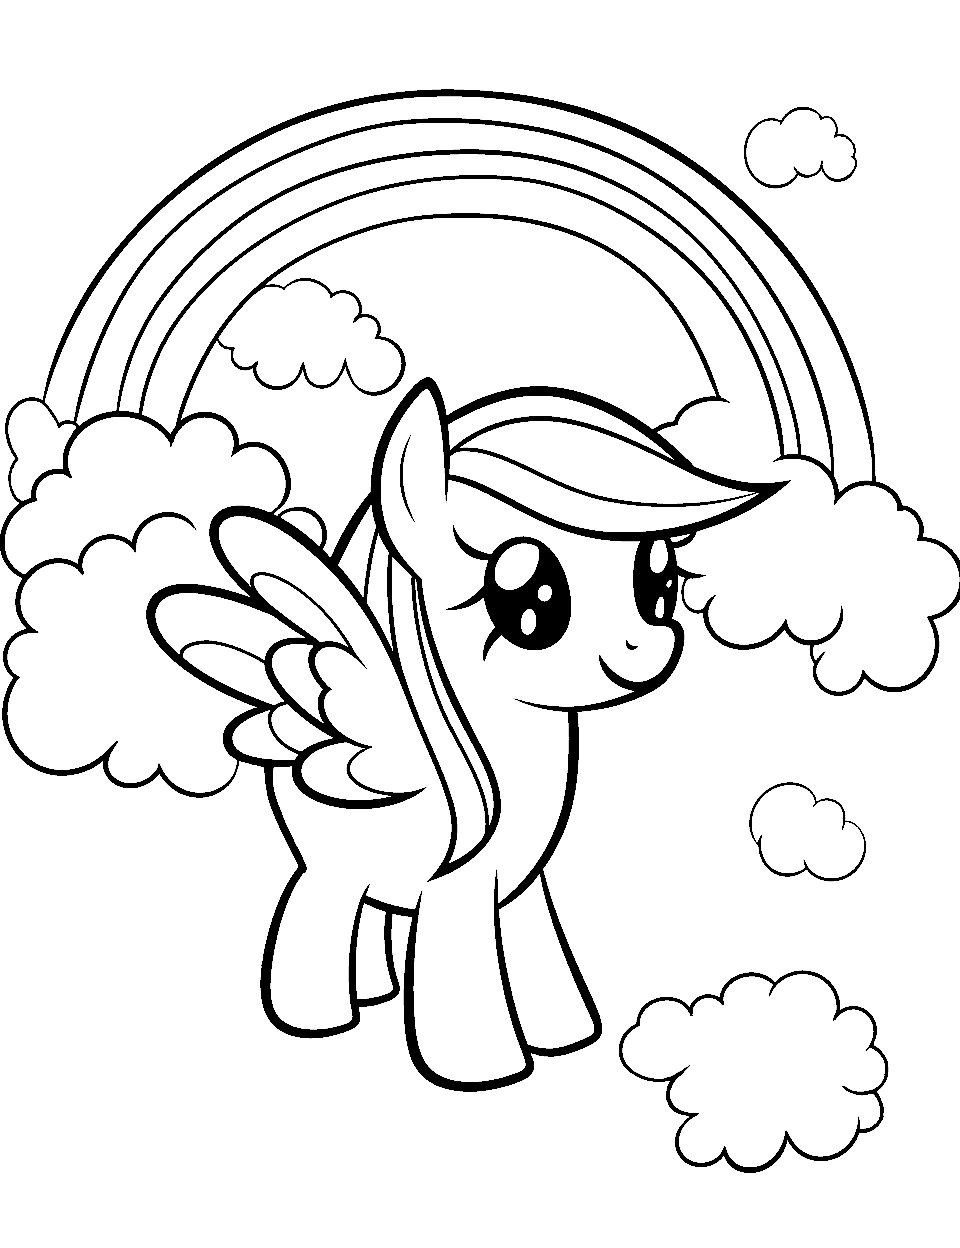 Rainbow Dash's Day Out Coloring Page - The popular My Little Pony character, Rainbow Dash, soaring high in the sky.